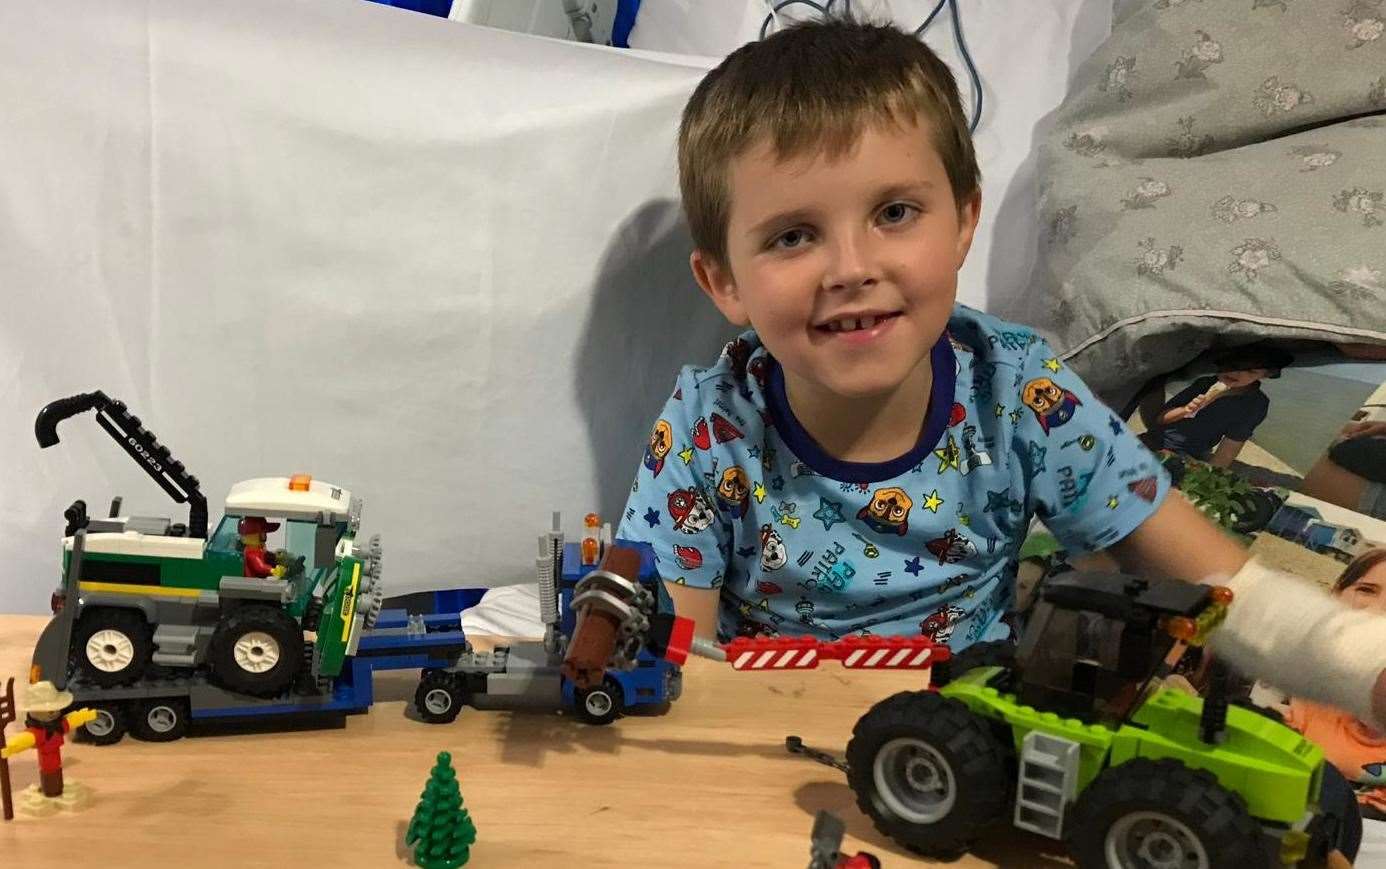 Joe Ward-Bates in King's College Hospital with the Lego sets he proudly built